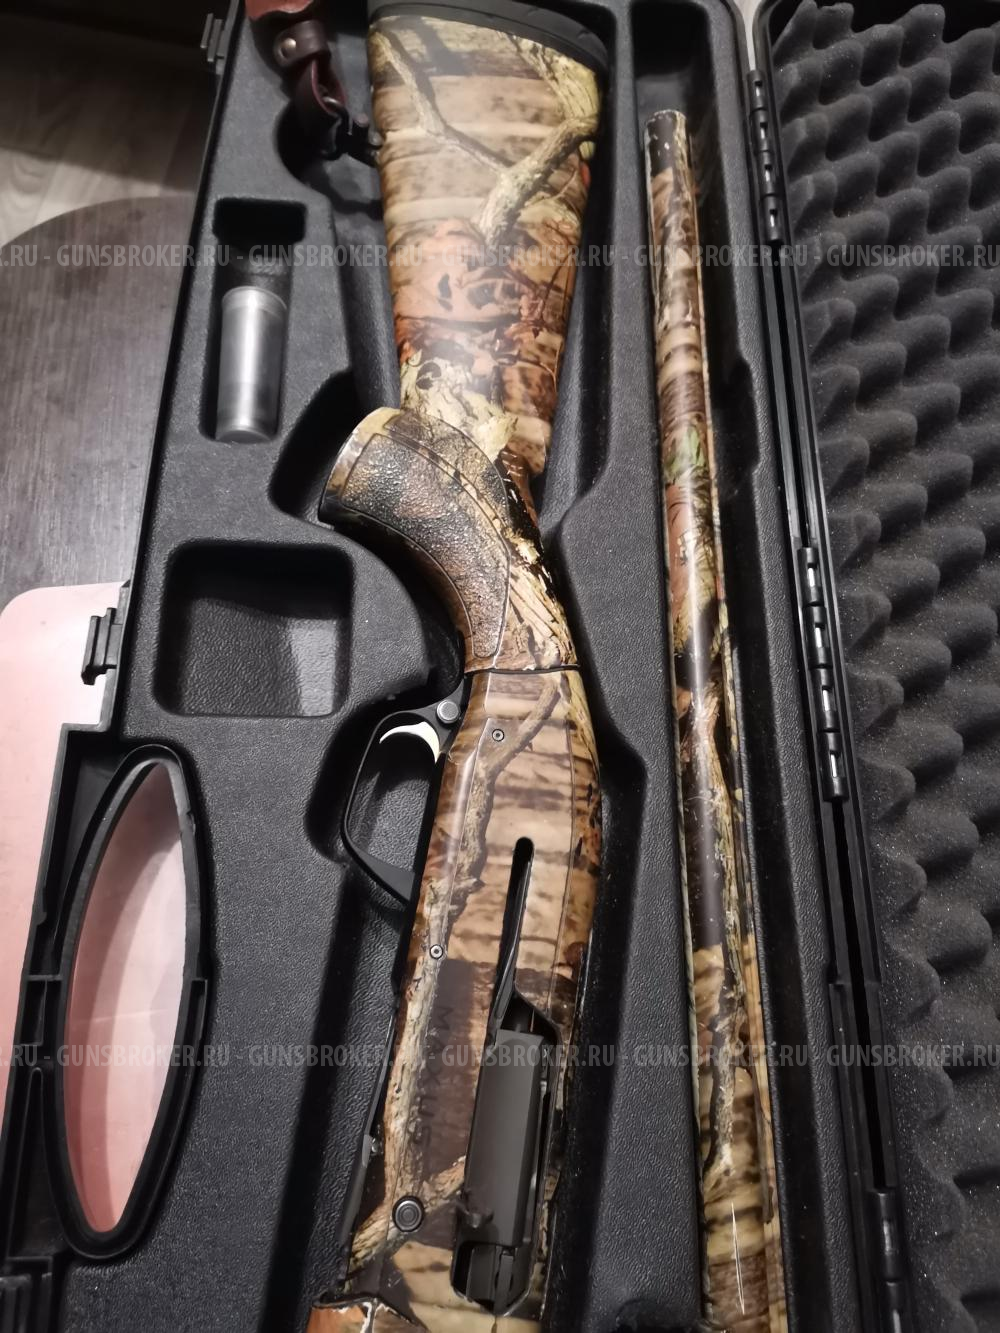 Browning Maxus Camo Moinf 12/76